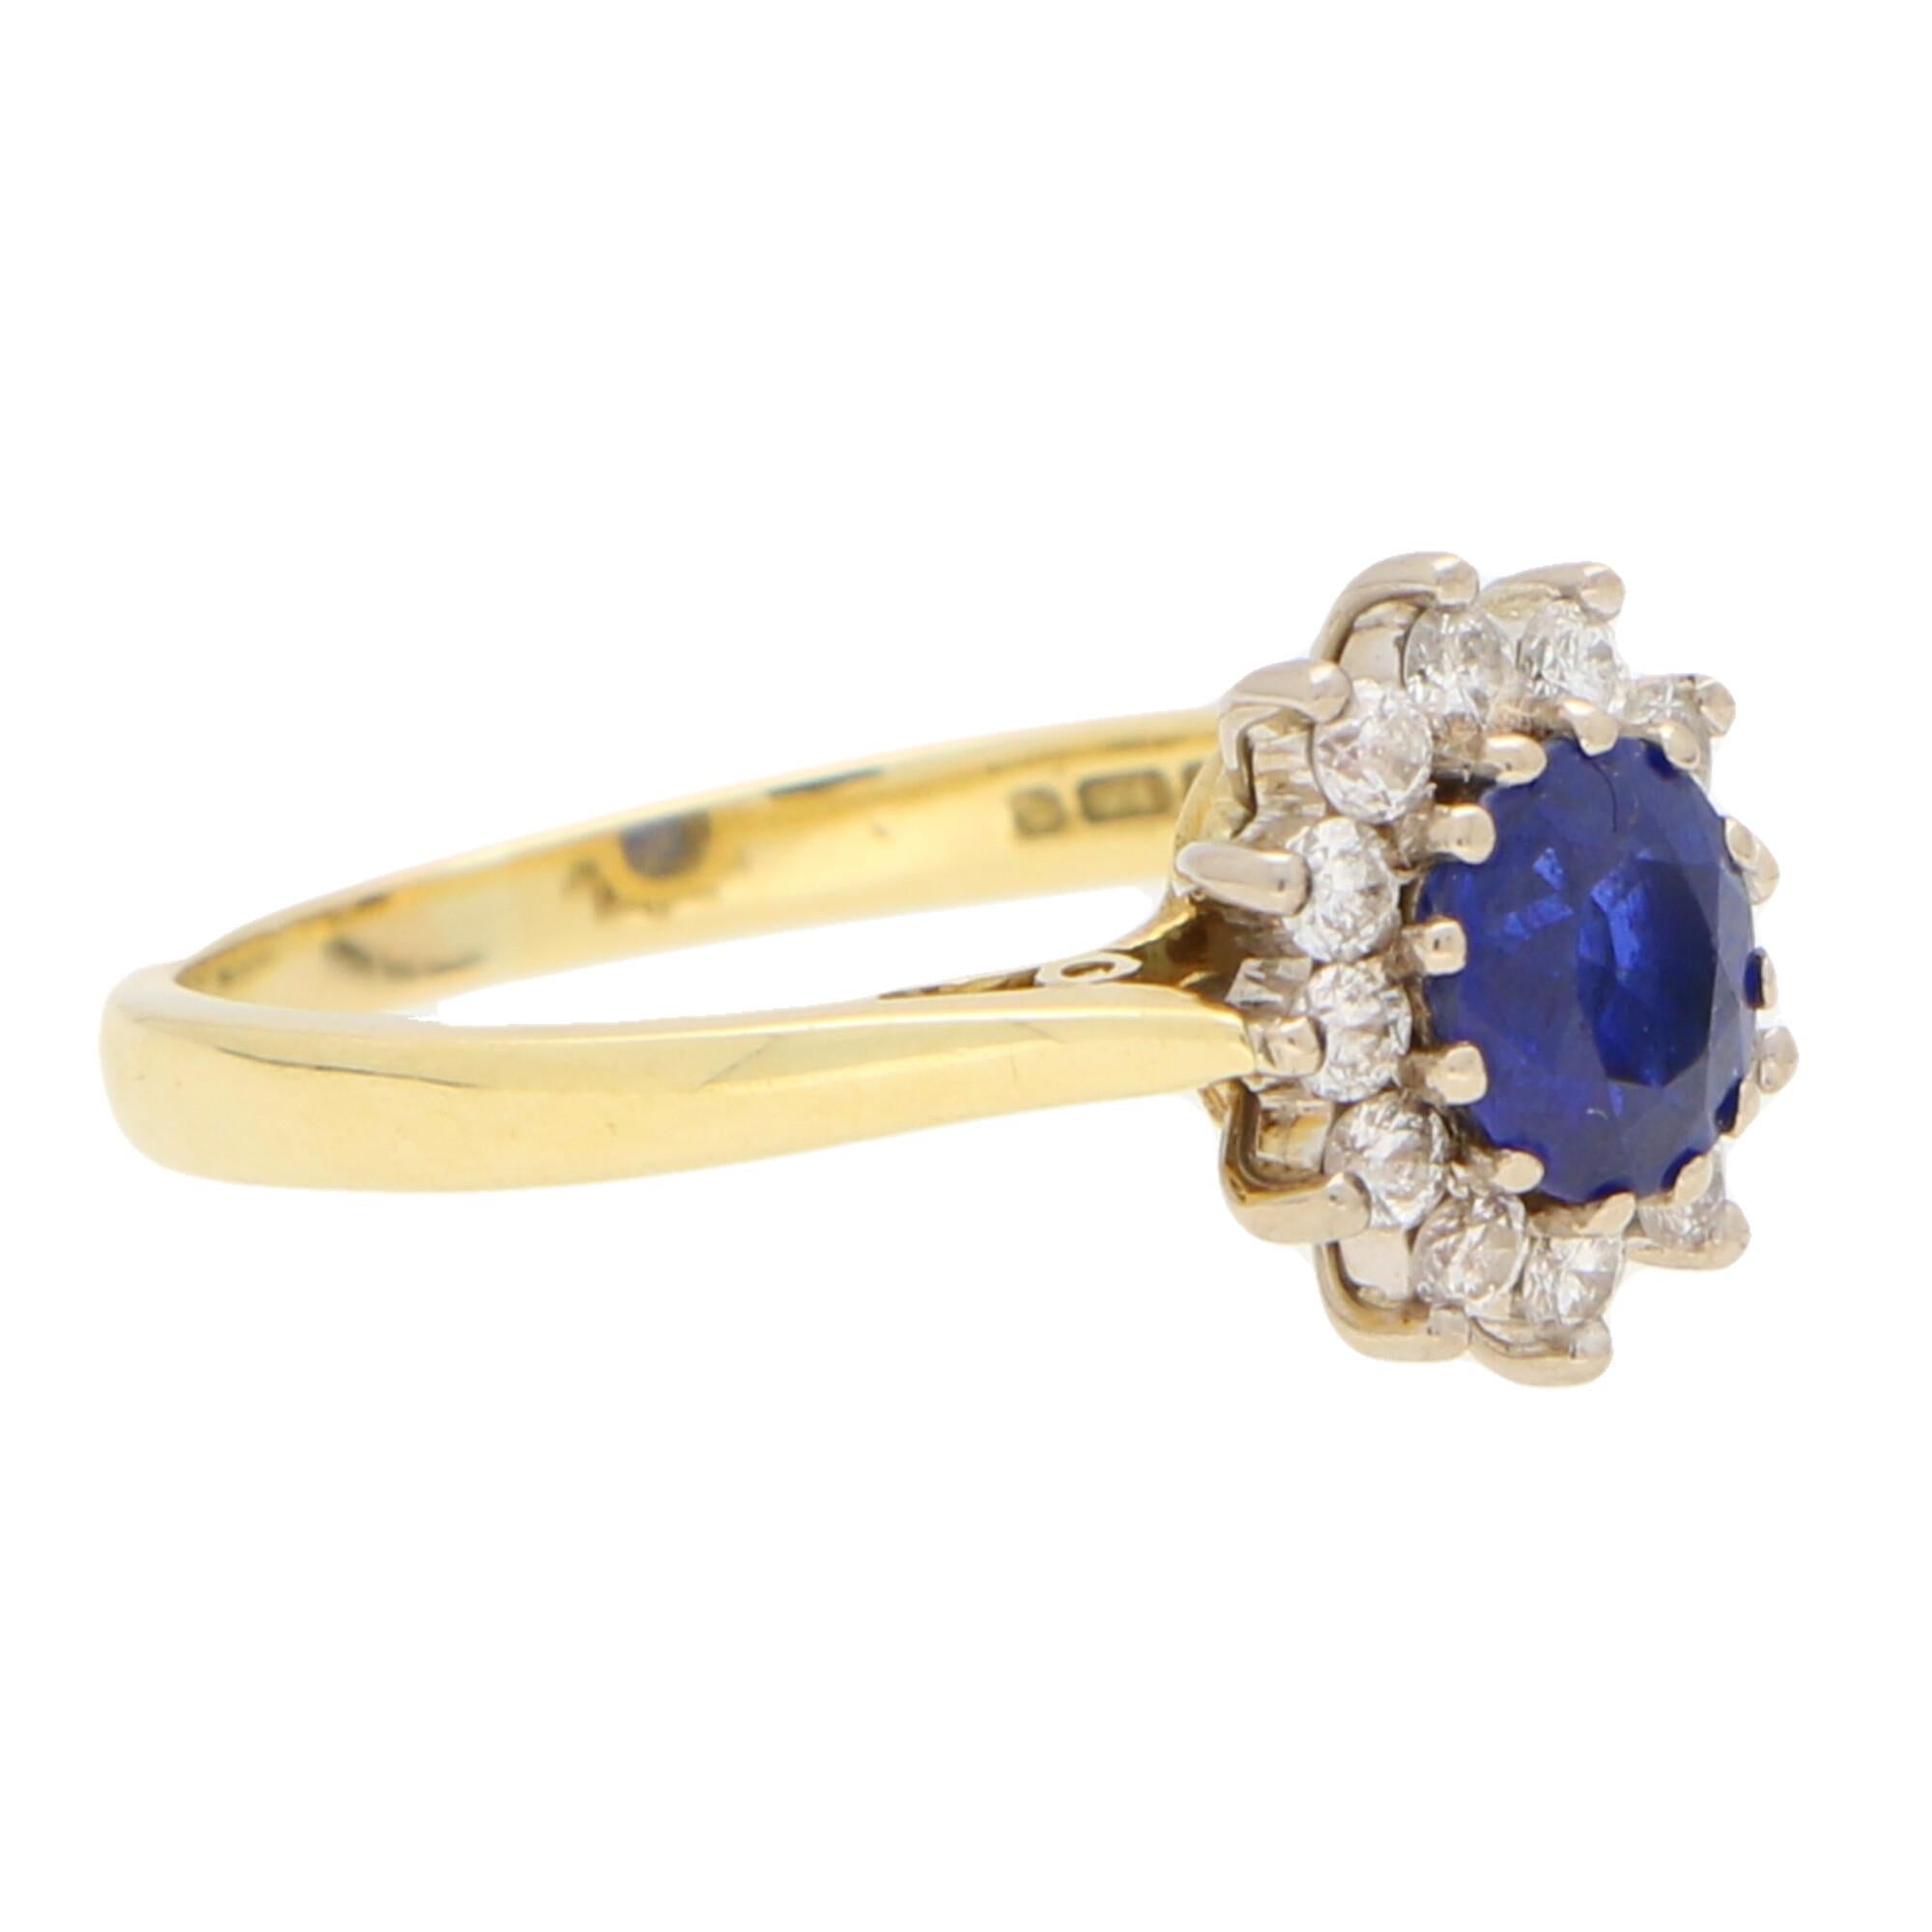 Oval Cut Sapphire and Diamond Cluster Ring Set in 18 Karat Yellow and White Gold